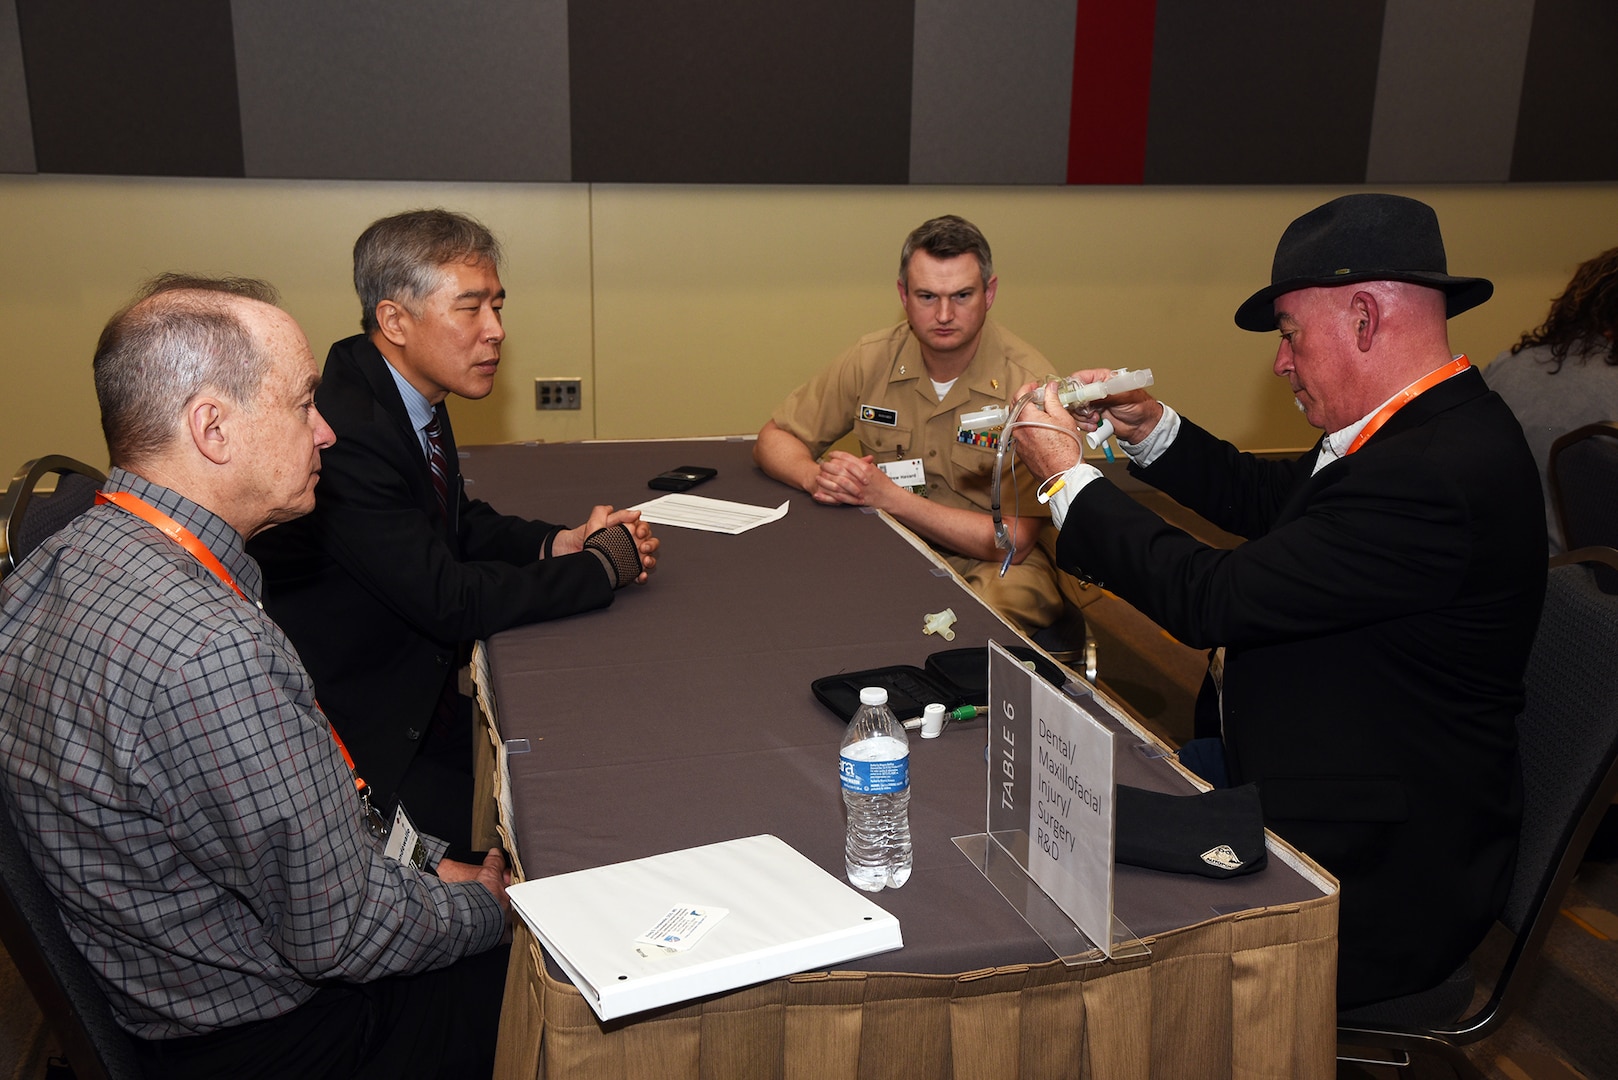 SAN ANTONIO - (May 2, 2023) – Scientists and researchers assigned to Naval Medical Research Unit (NAMRU) San Antonio attended the 4th Military Medical Industry Day (MMID) hosted by VelocityTX, a subsidiary of Texas Research & Technology Foundation, the City of San Antonio, and Bexar County at the Henry B. Gonzalez Convention Center. The following tri-service sessions were conducted: Blood and Shock Resuscitation/Hemorrhage and Edema Control + Organ Function Support; Combat Wound Care I (infection/sepsis: diagnosis, treatment, prevention); Combat Wound Care II (burns: assessment and treatment); Battlefield Pain Management + Traumatic Brain Injury/Polytrauma Related; Engineering, Automation, and Technology (includes Bioengineering, 3D printing); Dental/Maxillofacial Injury/Surgery Research and Development; and Military Medical Simulation/Education/Training. The MMID provides a platform for innovators and entrepreneurs to learn about military medical requirements, available funding sources to support research and development, and ways to work with the military. NAMRU San Antonio’s mission is to conduct gap driven combat casualty care, craniofacial, and directed energy research to improve survival, operational readiness, and safety of Department of Defense (DoD) personnel engaged in routine and expeditionary operations. It is one of the leading research and development laboratories for the U.S. Navy under the DoD and is one of eight subordinate research commands in the global network of laboratories operating under Naval Medical Research Command (NMRC) in Silver Spring, Md. (U.S. Navy photo by Burrell Parmer, NAMRU San Antonio Public Affairs/Released)